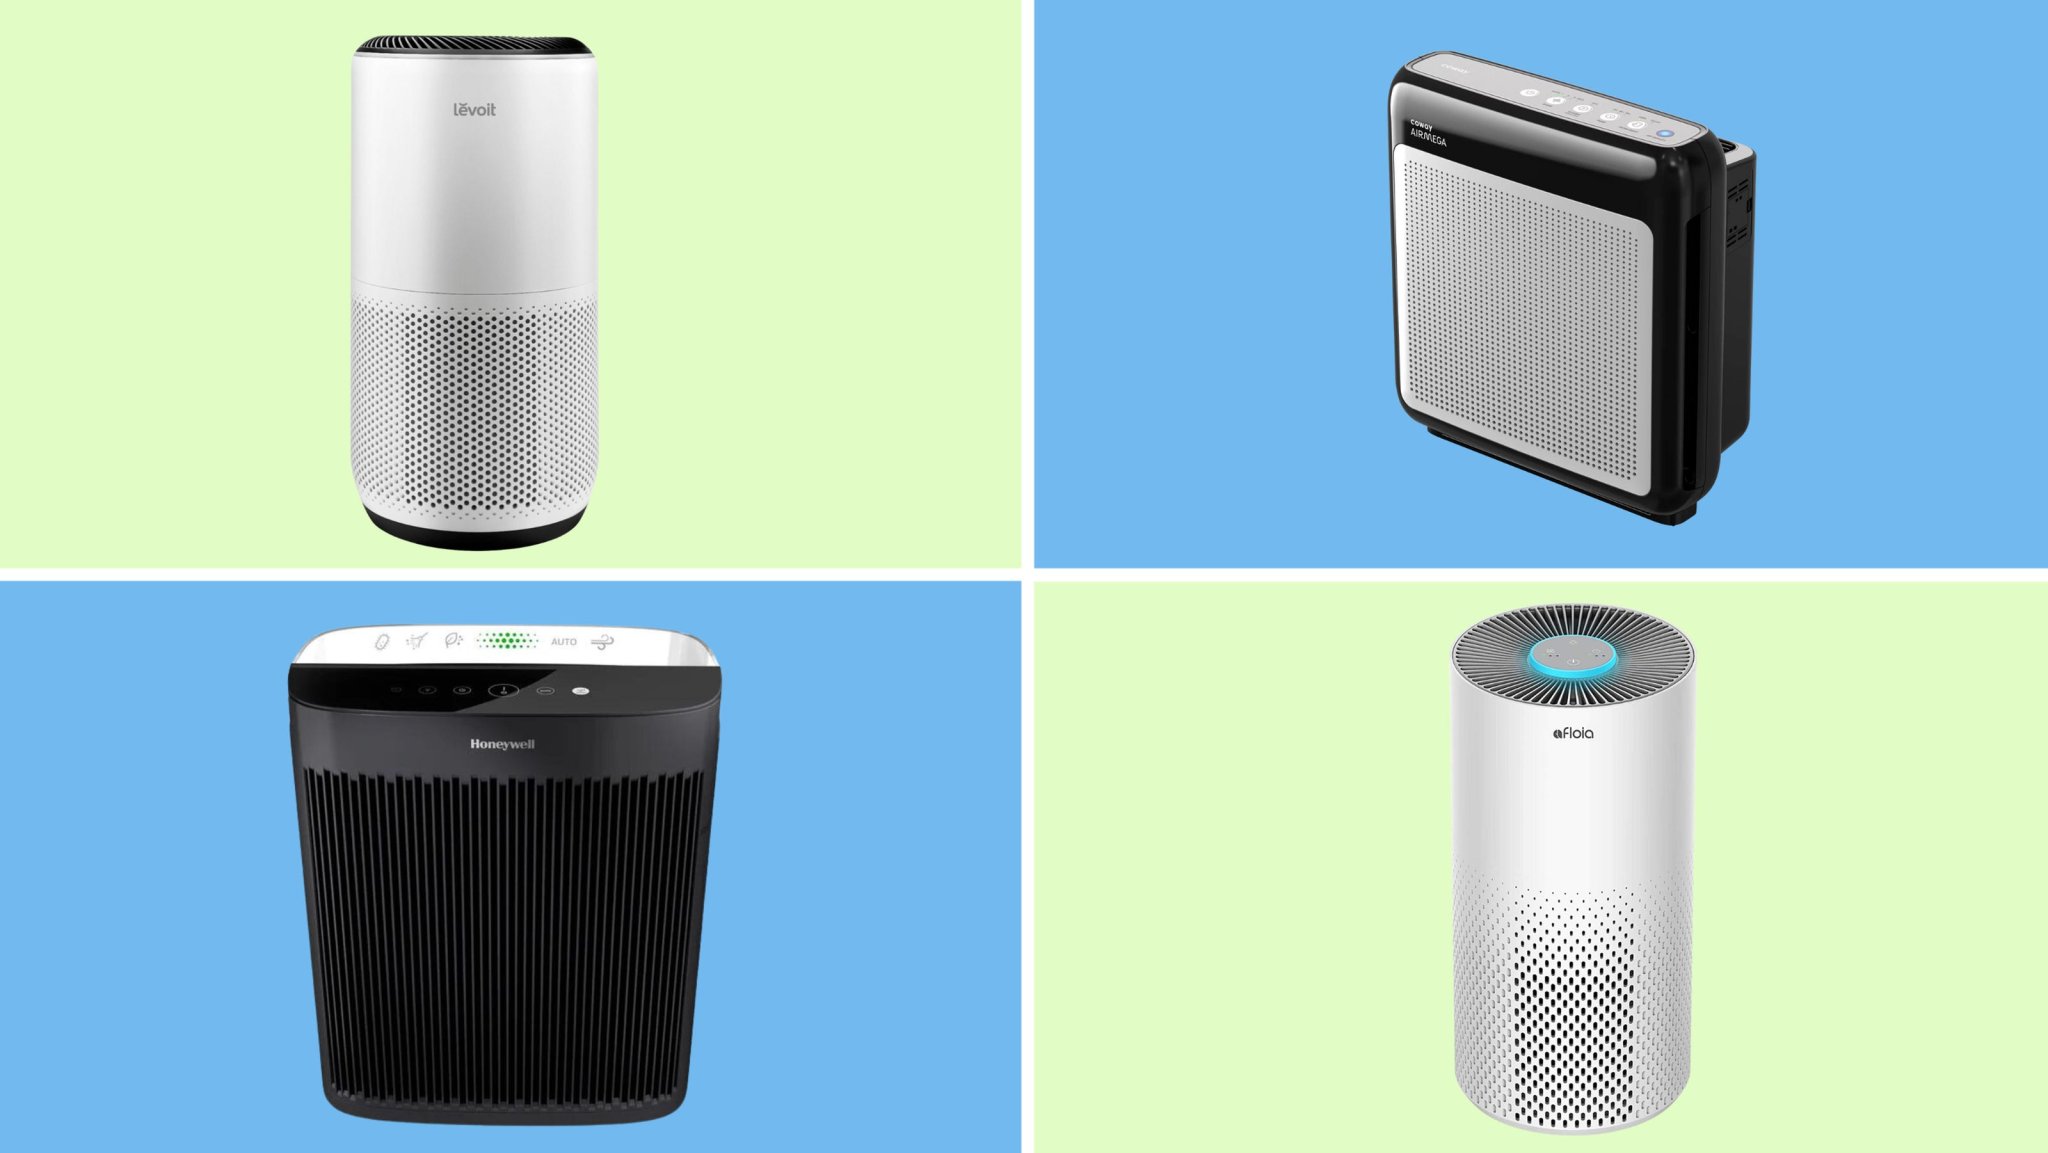 Stay safe from wildfire smoke with air purifier deals at Amazon, QVC, Best Buy and more